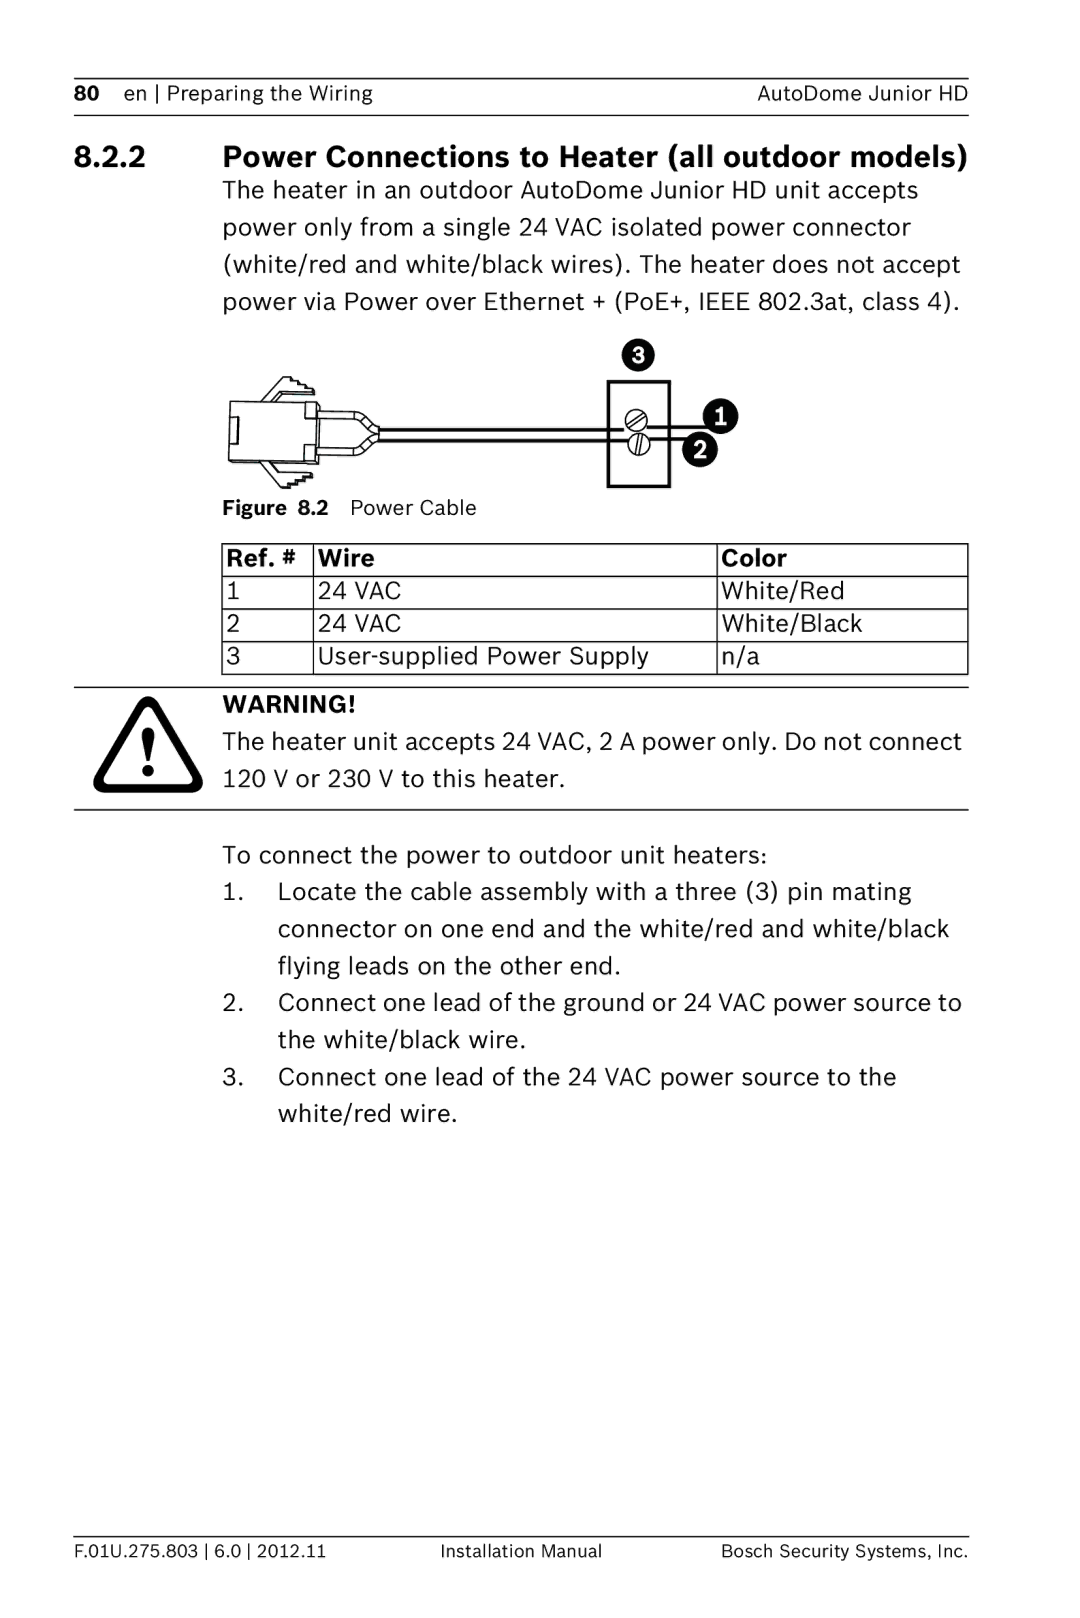 Bosch Appliances VJR SERIES installation manual Power Connections to Heater all outdoor models 